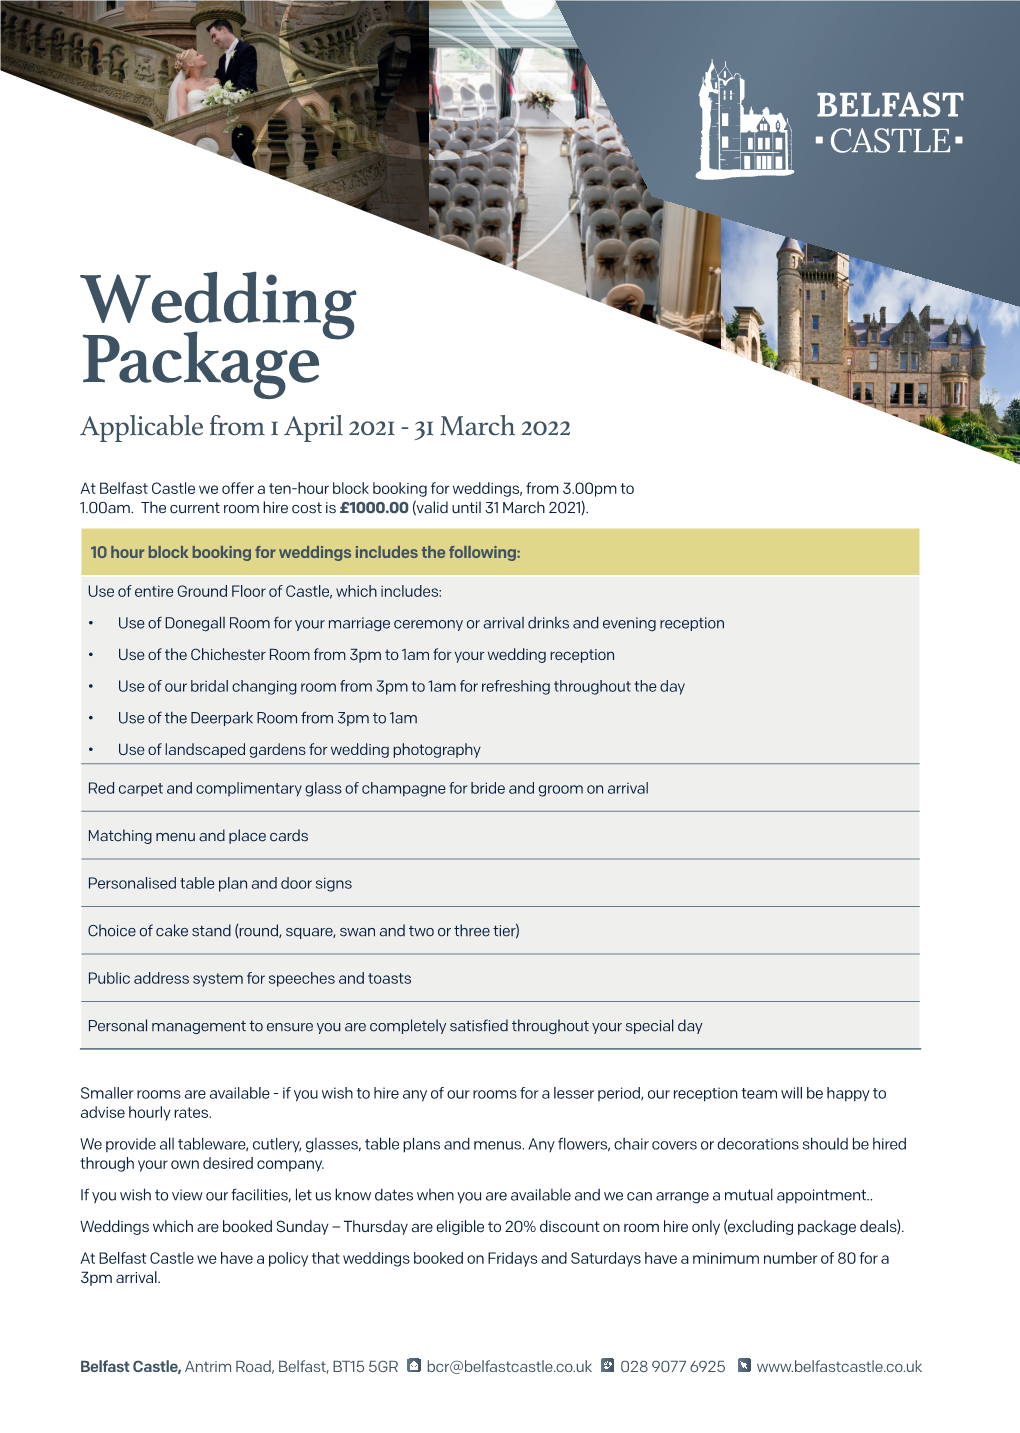 Wedding Package Applicable from 1 April 2021 - 31 March 2022